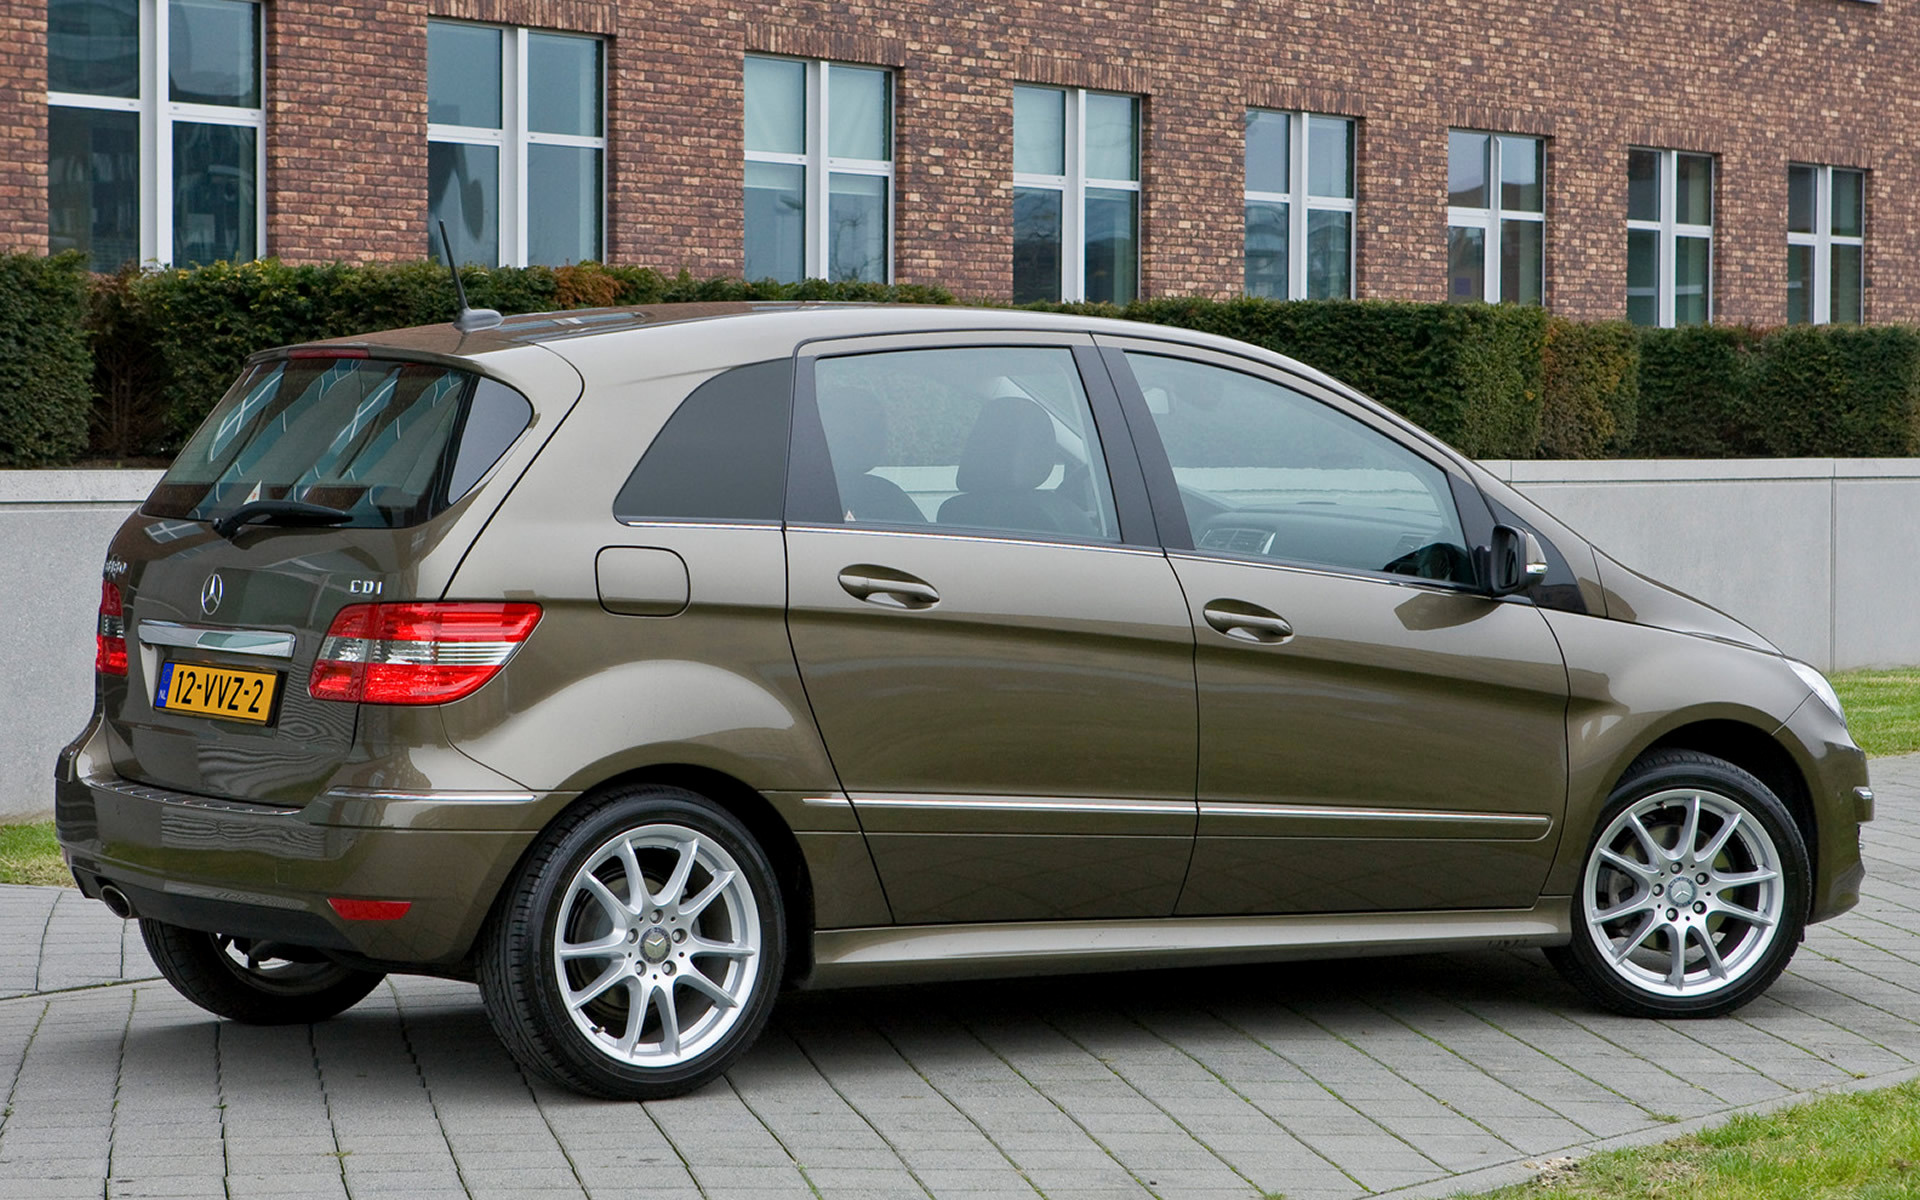 2008 Mercedes-Benz B-klasse ( W245 ) by Lorinser #258058 - Best quality  free high resolution car images - mad4wheels